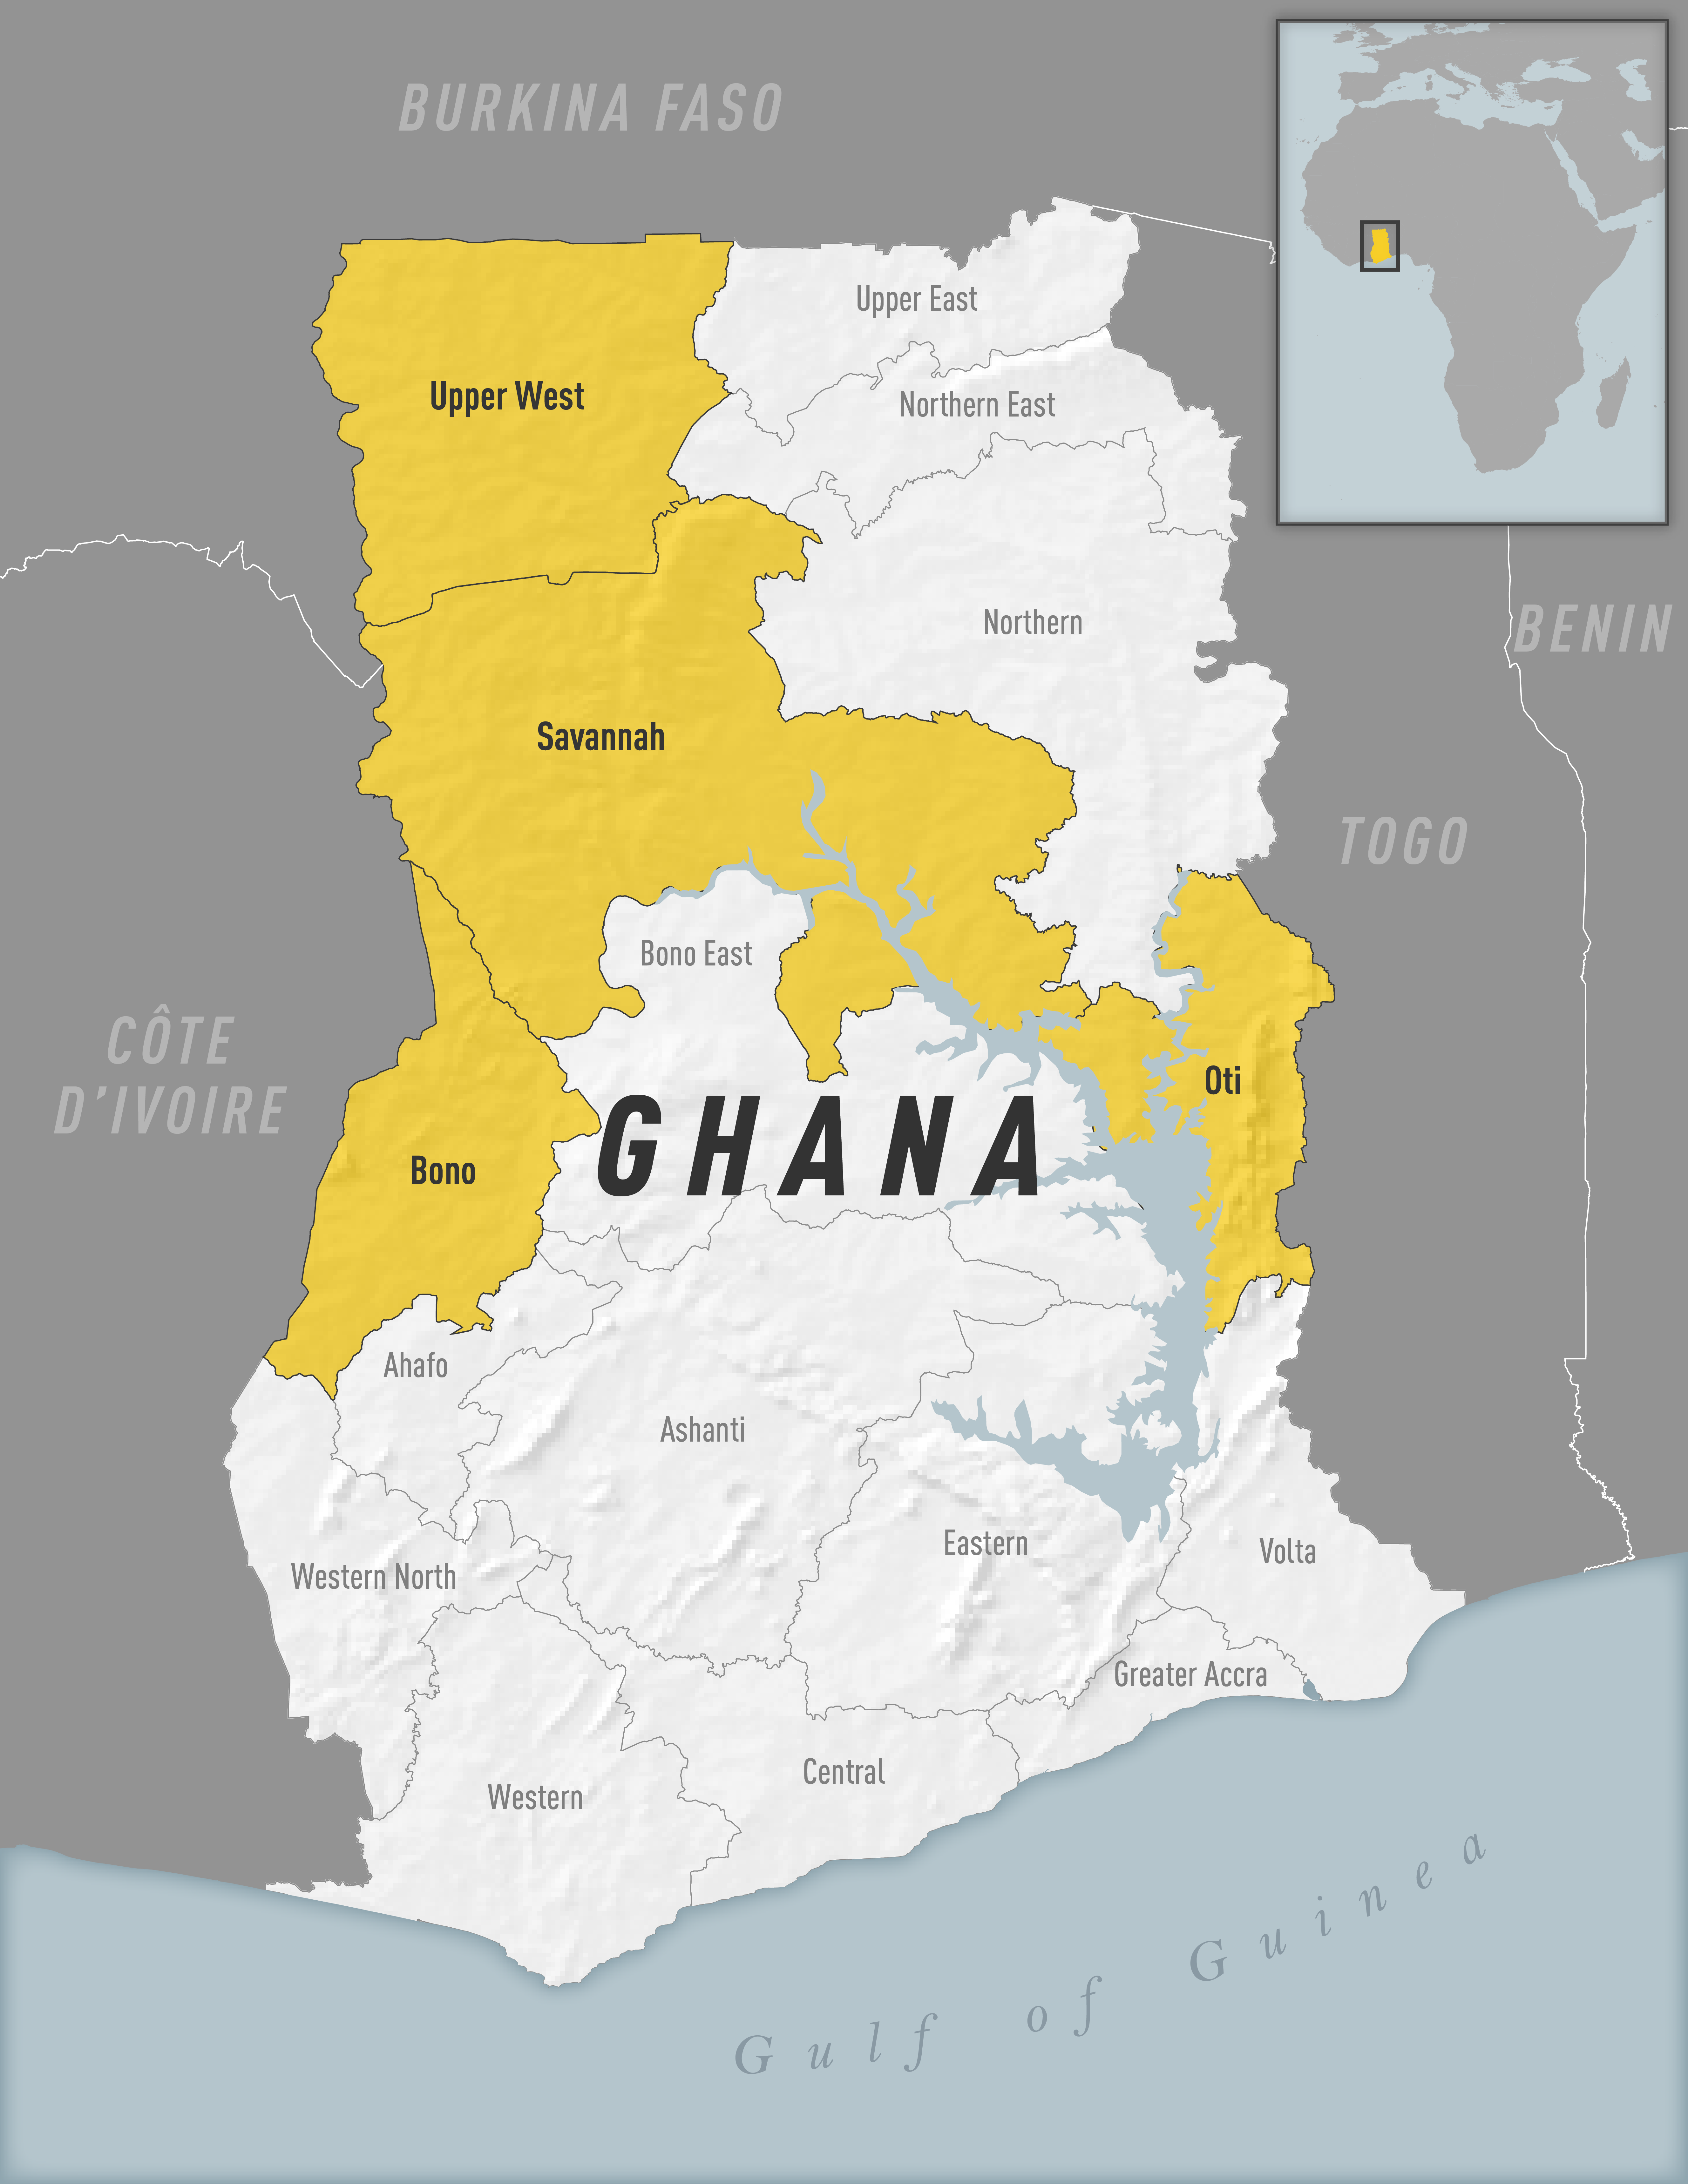 Map of yellow fever outbreak area in Ghana